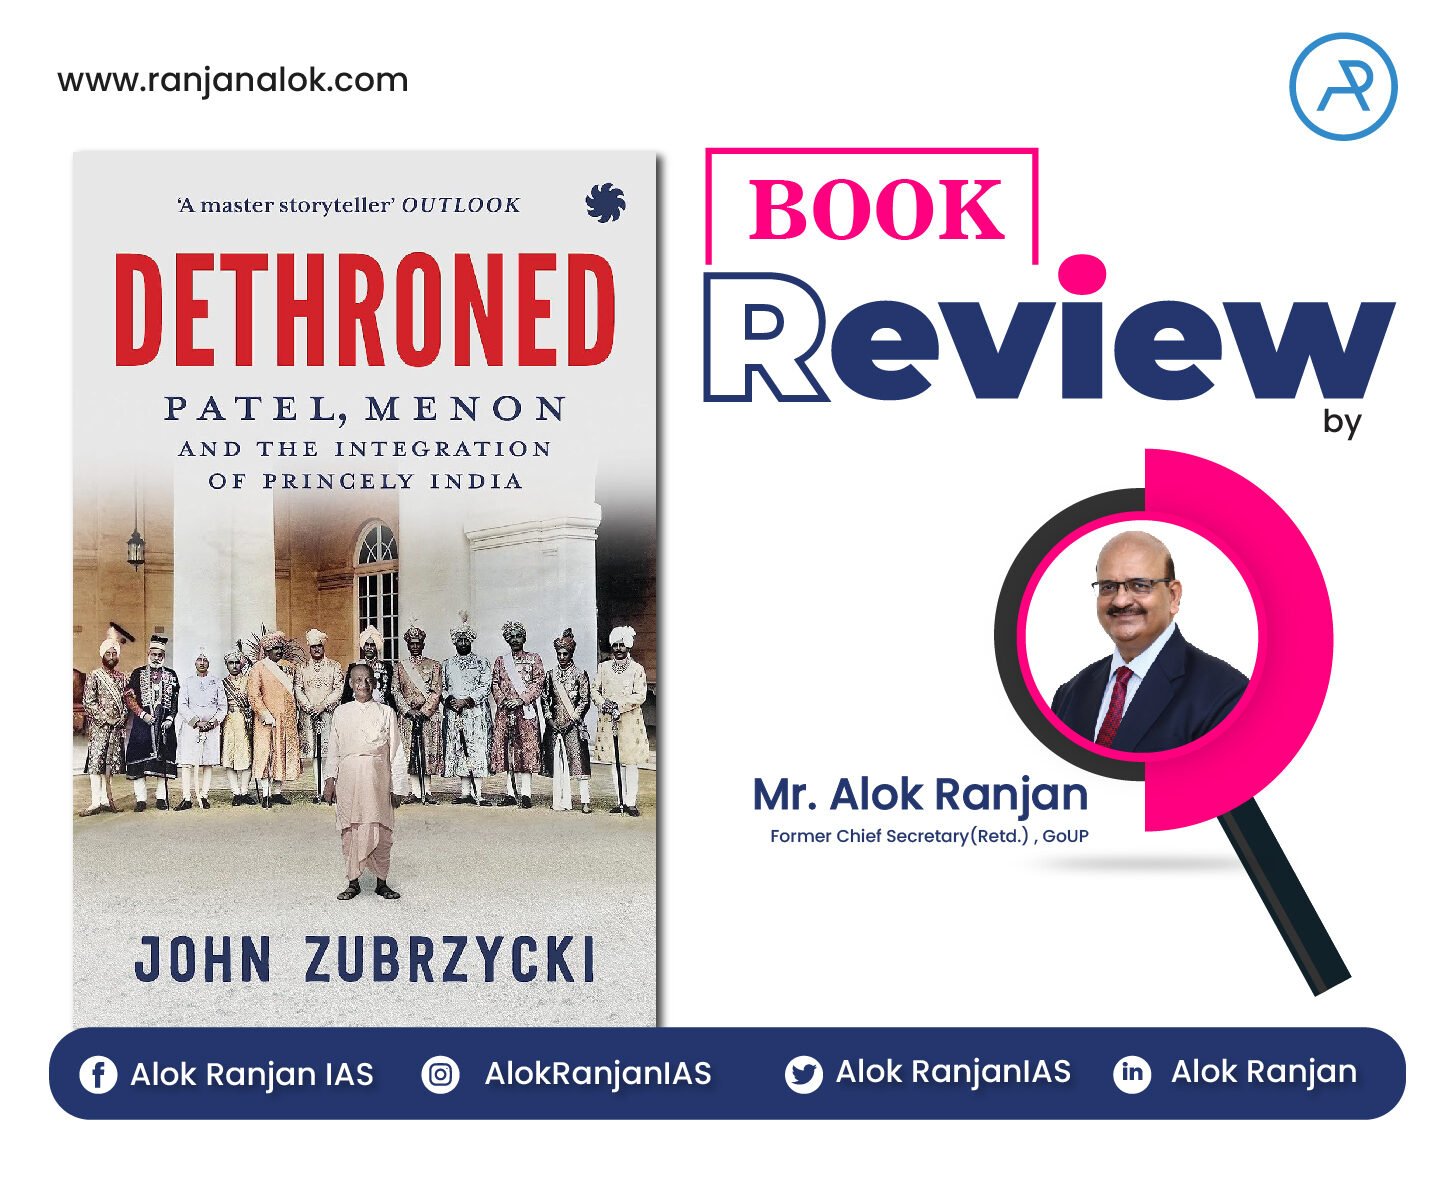 I just finished reading “Dethroned-Patel, Menon and the integration of princely India” by John Zubrzyck